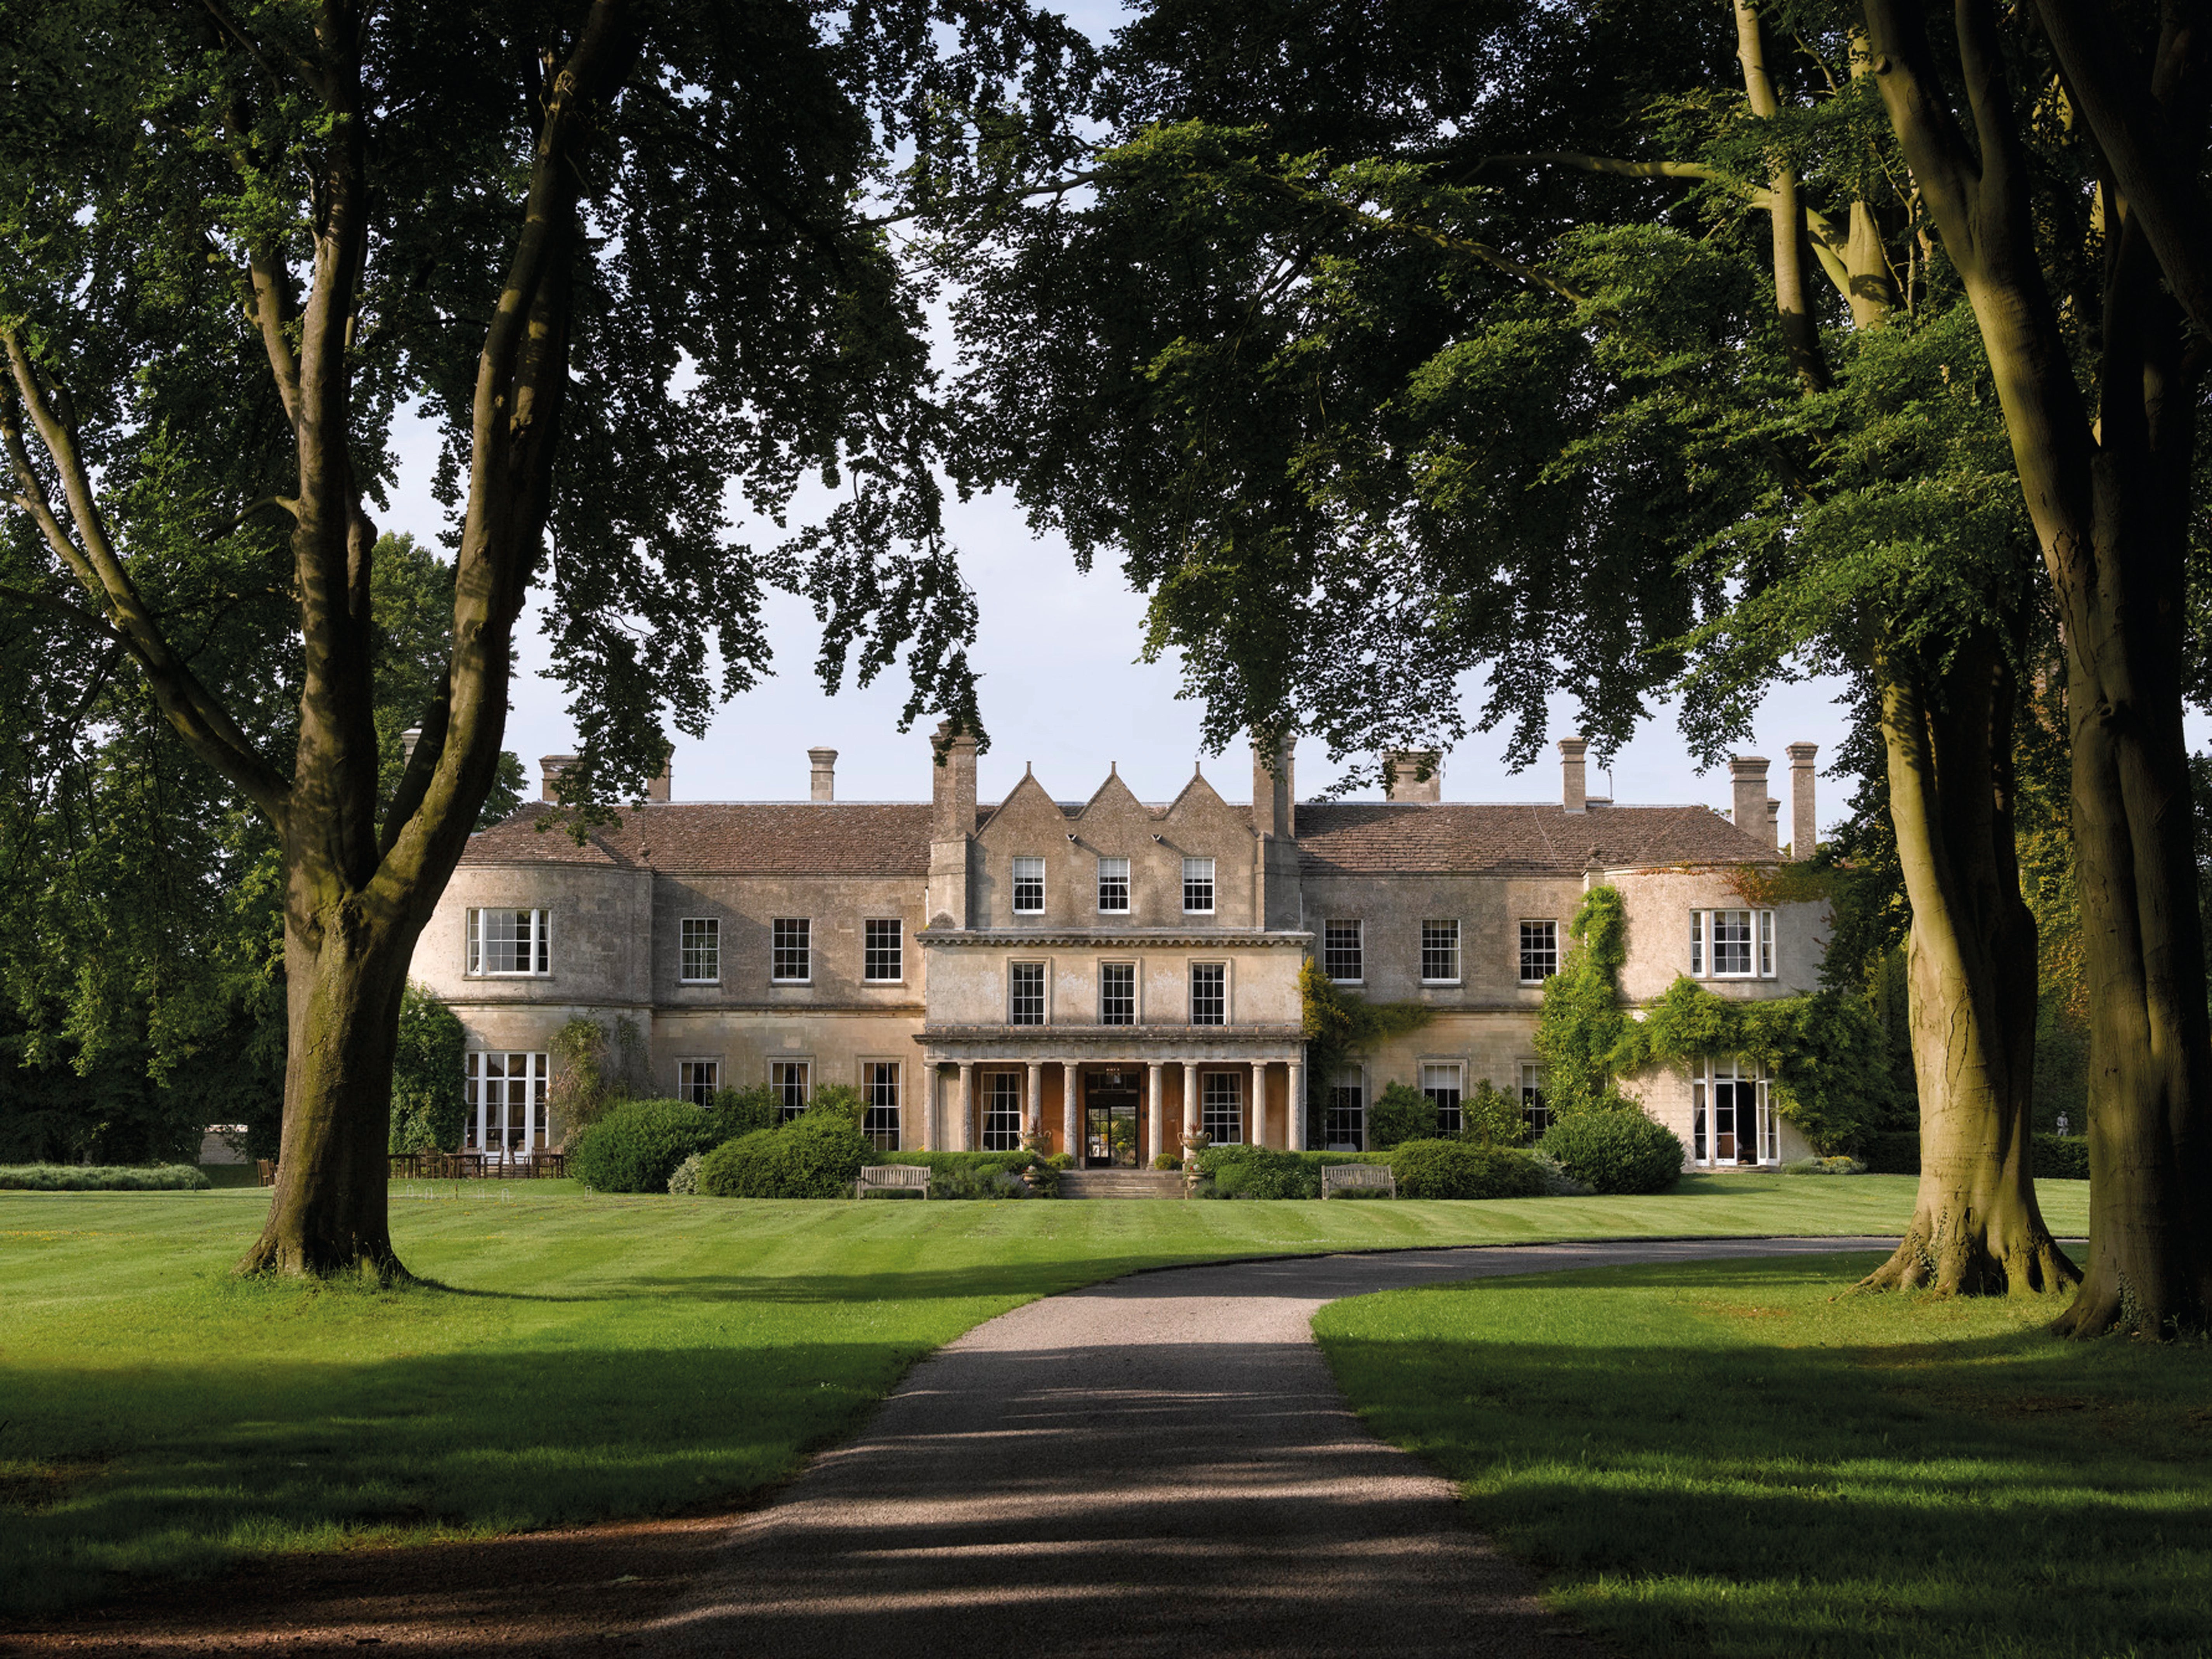 Home to a top-of-the-range spa and a Michelin-starred restaurant